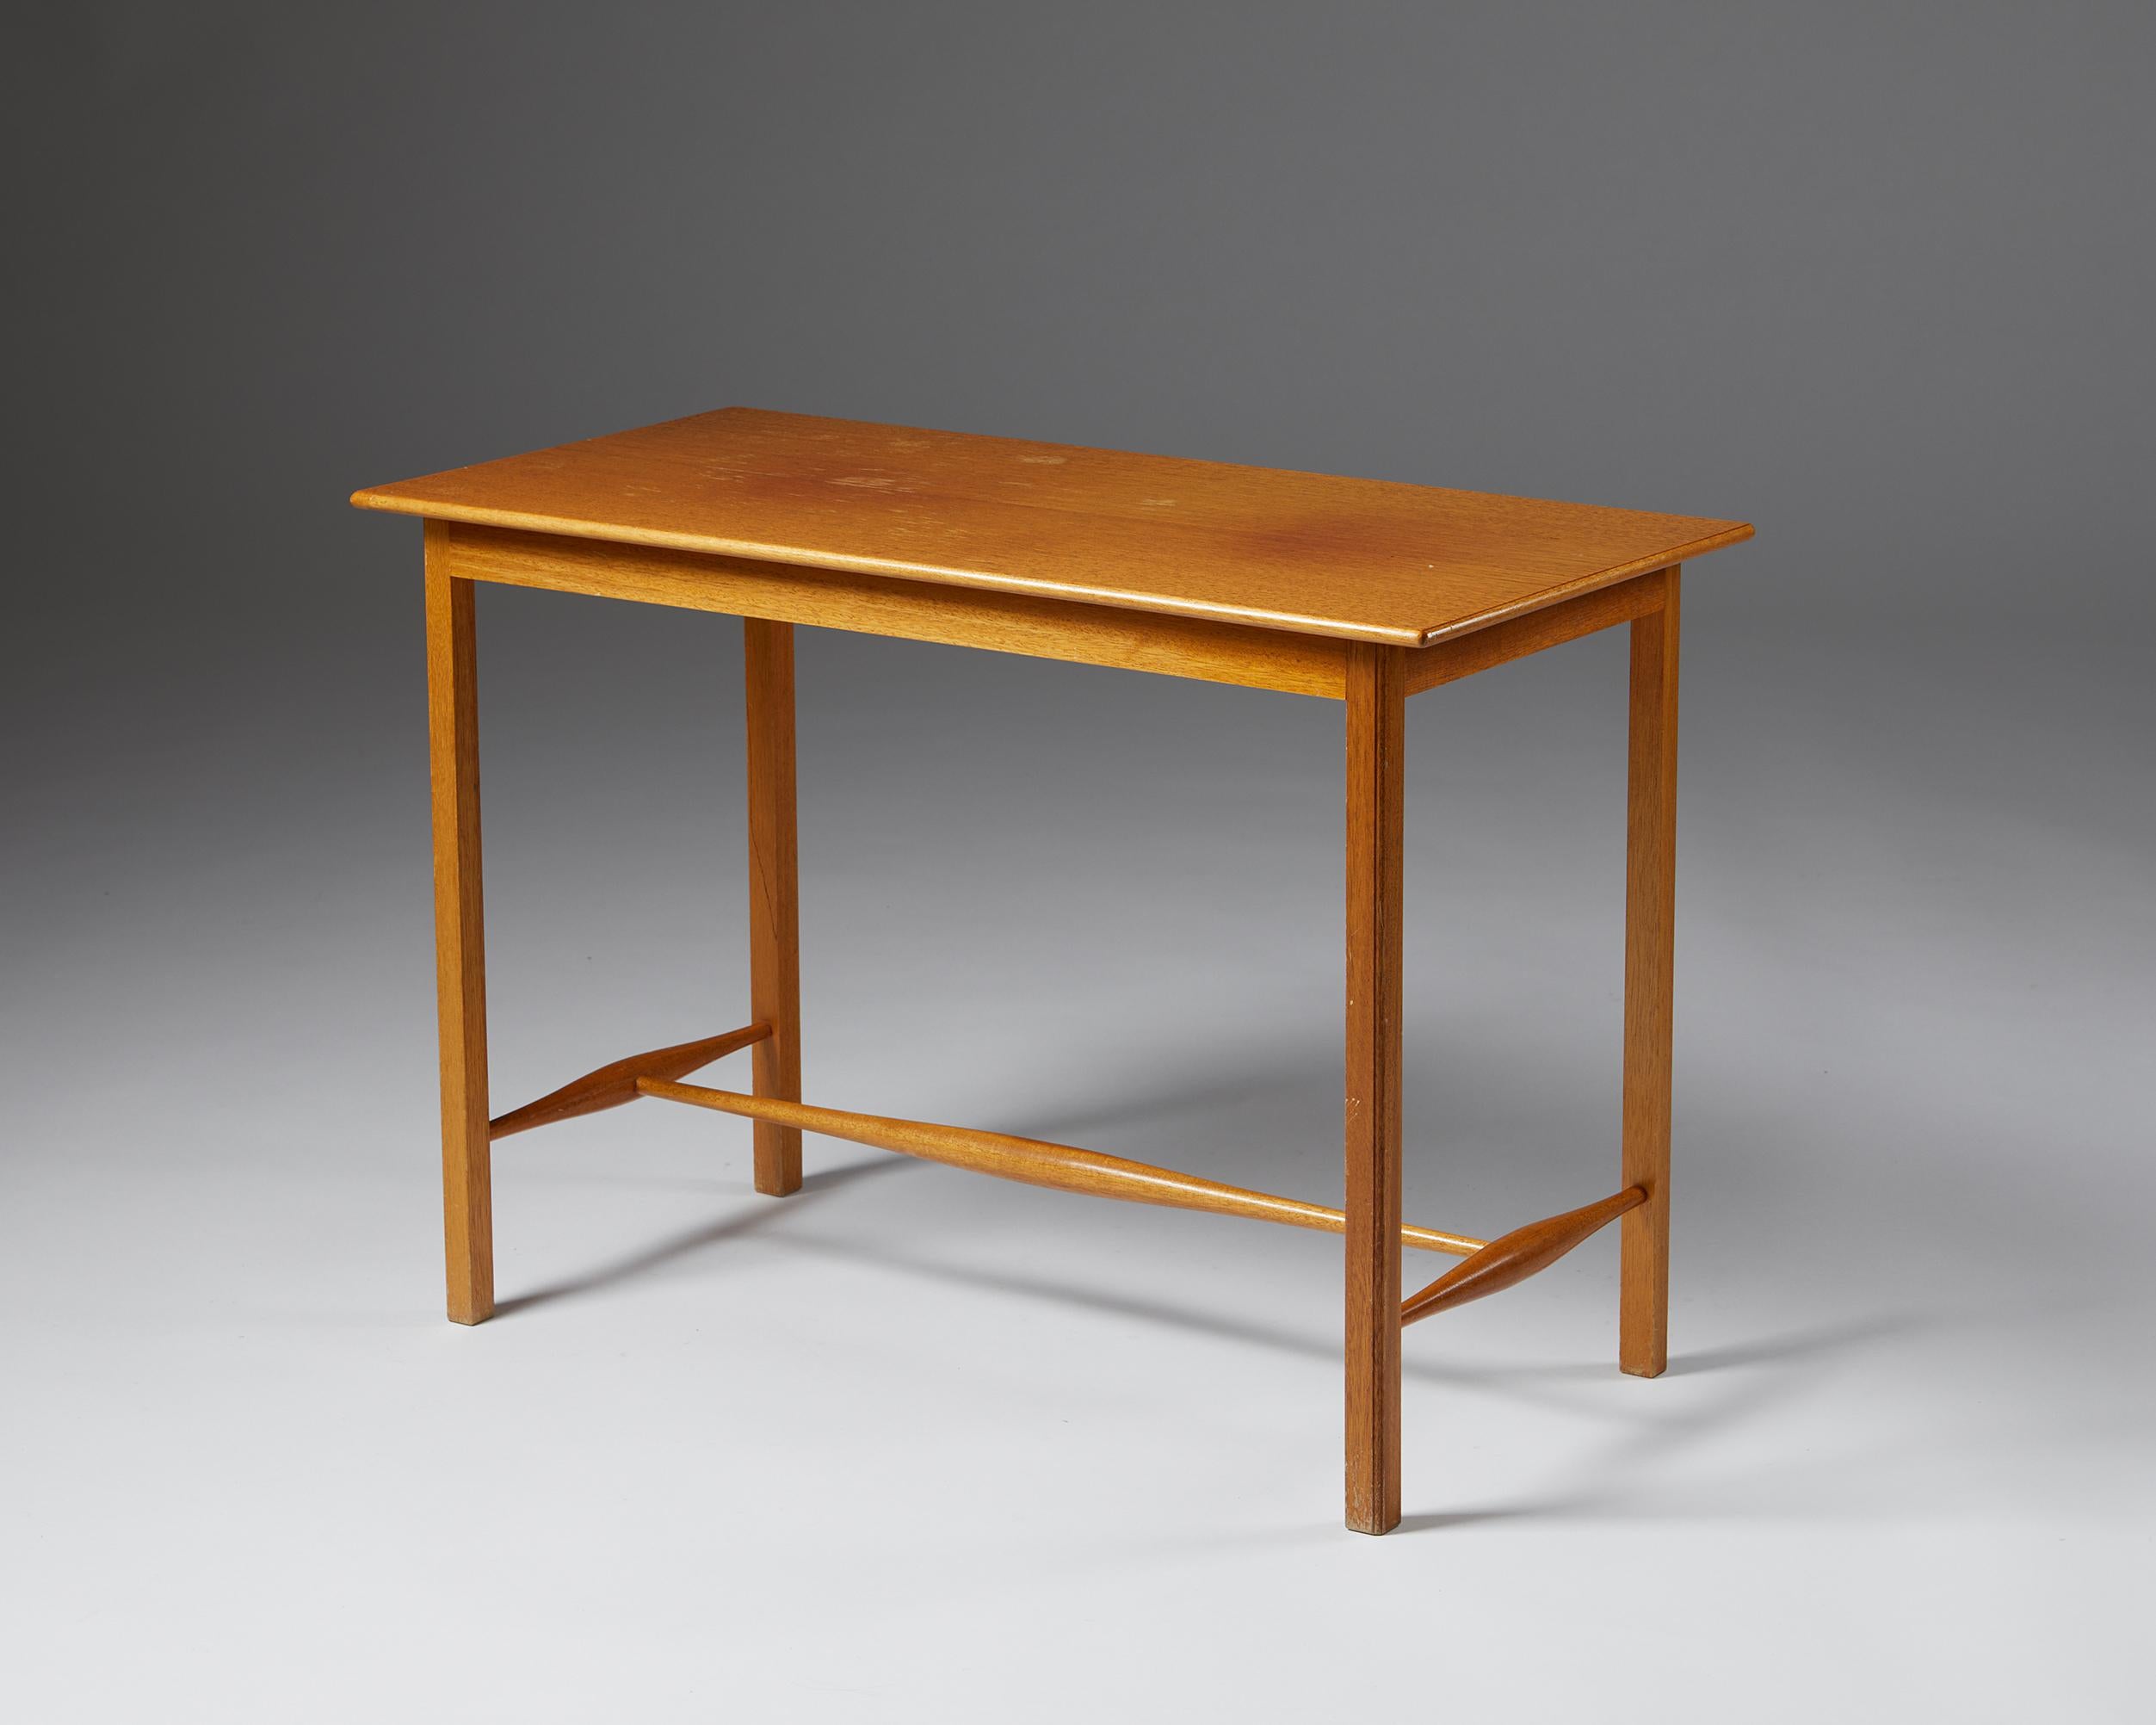 Table designed by Josef Frank for Svenskt Tenn,
Sweden, 1950s.

Mahogany veneer.

H: 55 cm
W: 80 cm
D: 40 cm

Josef Frank was a true European, he was also a pioneer of what would become classic 20th century Swedish design and the “Scandinavian